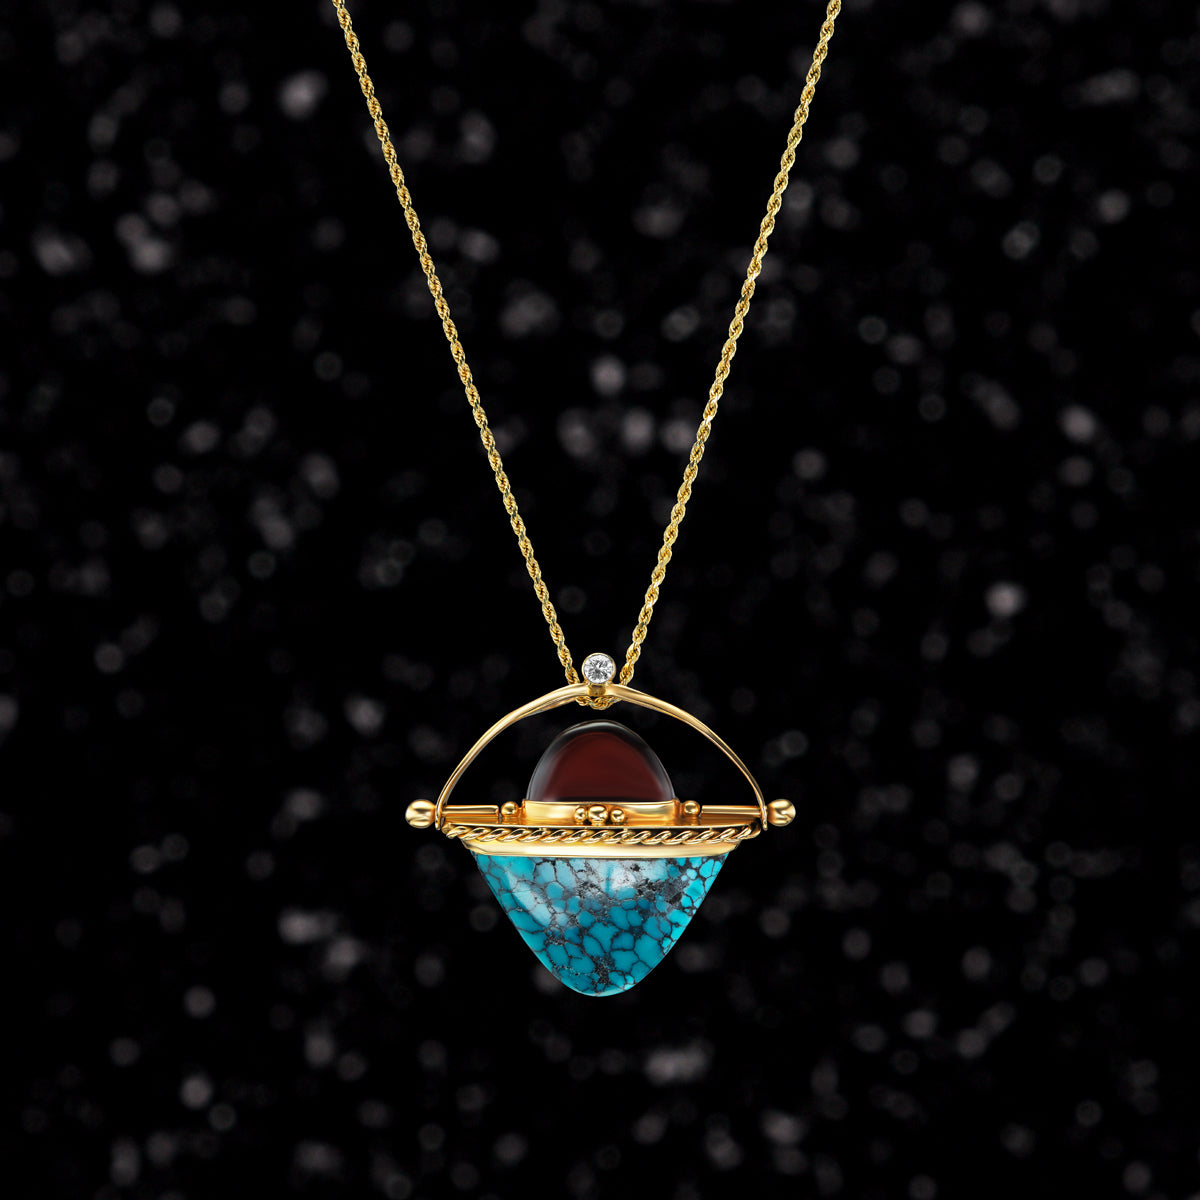 THE ROSWELL NECKLACE